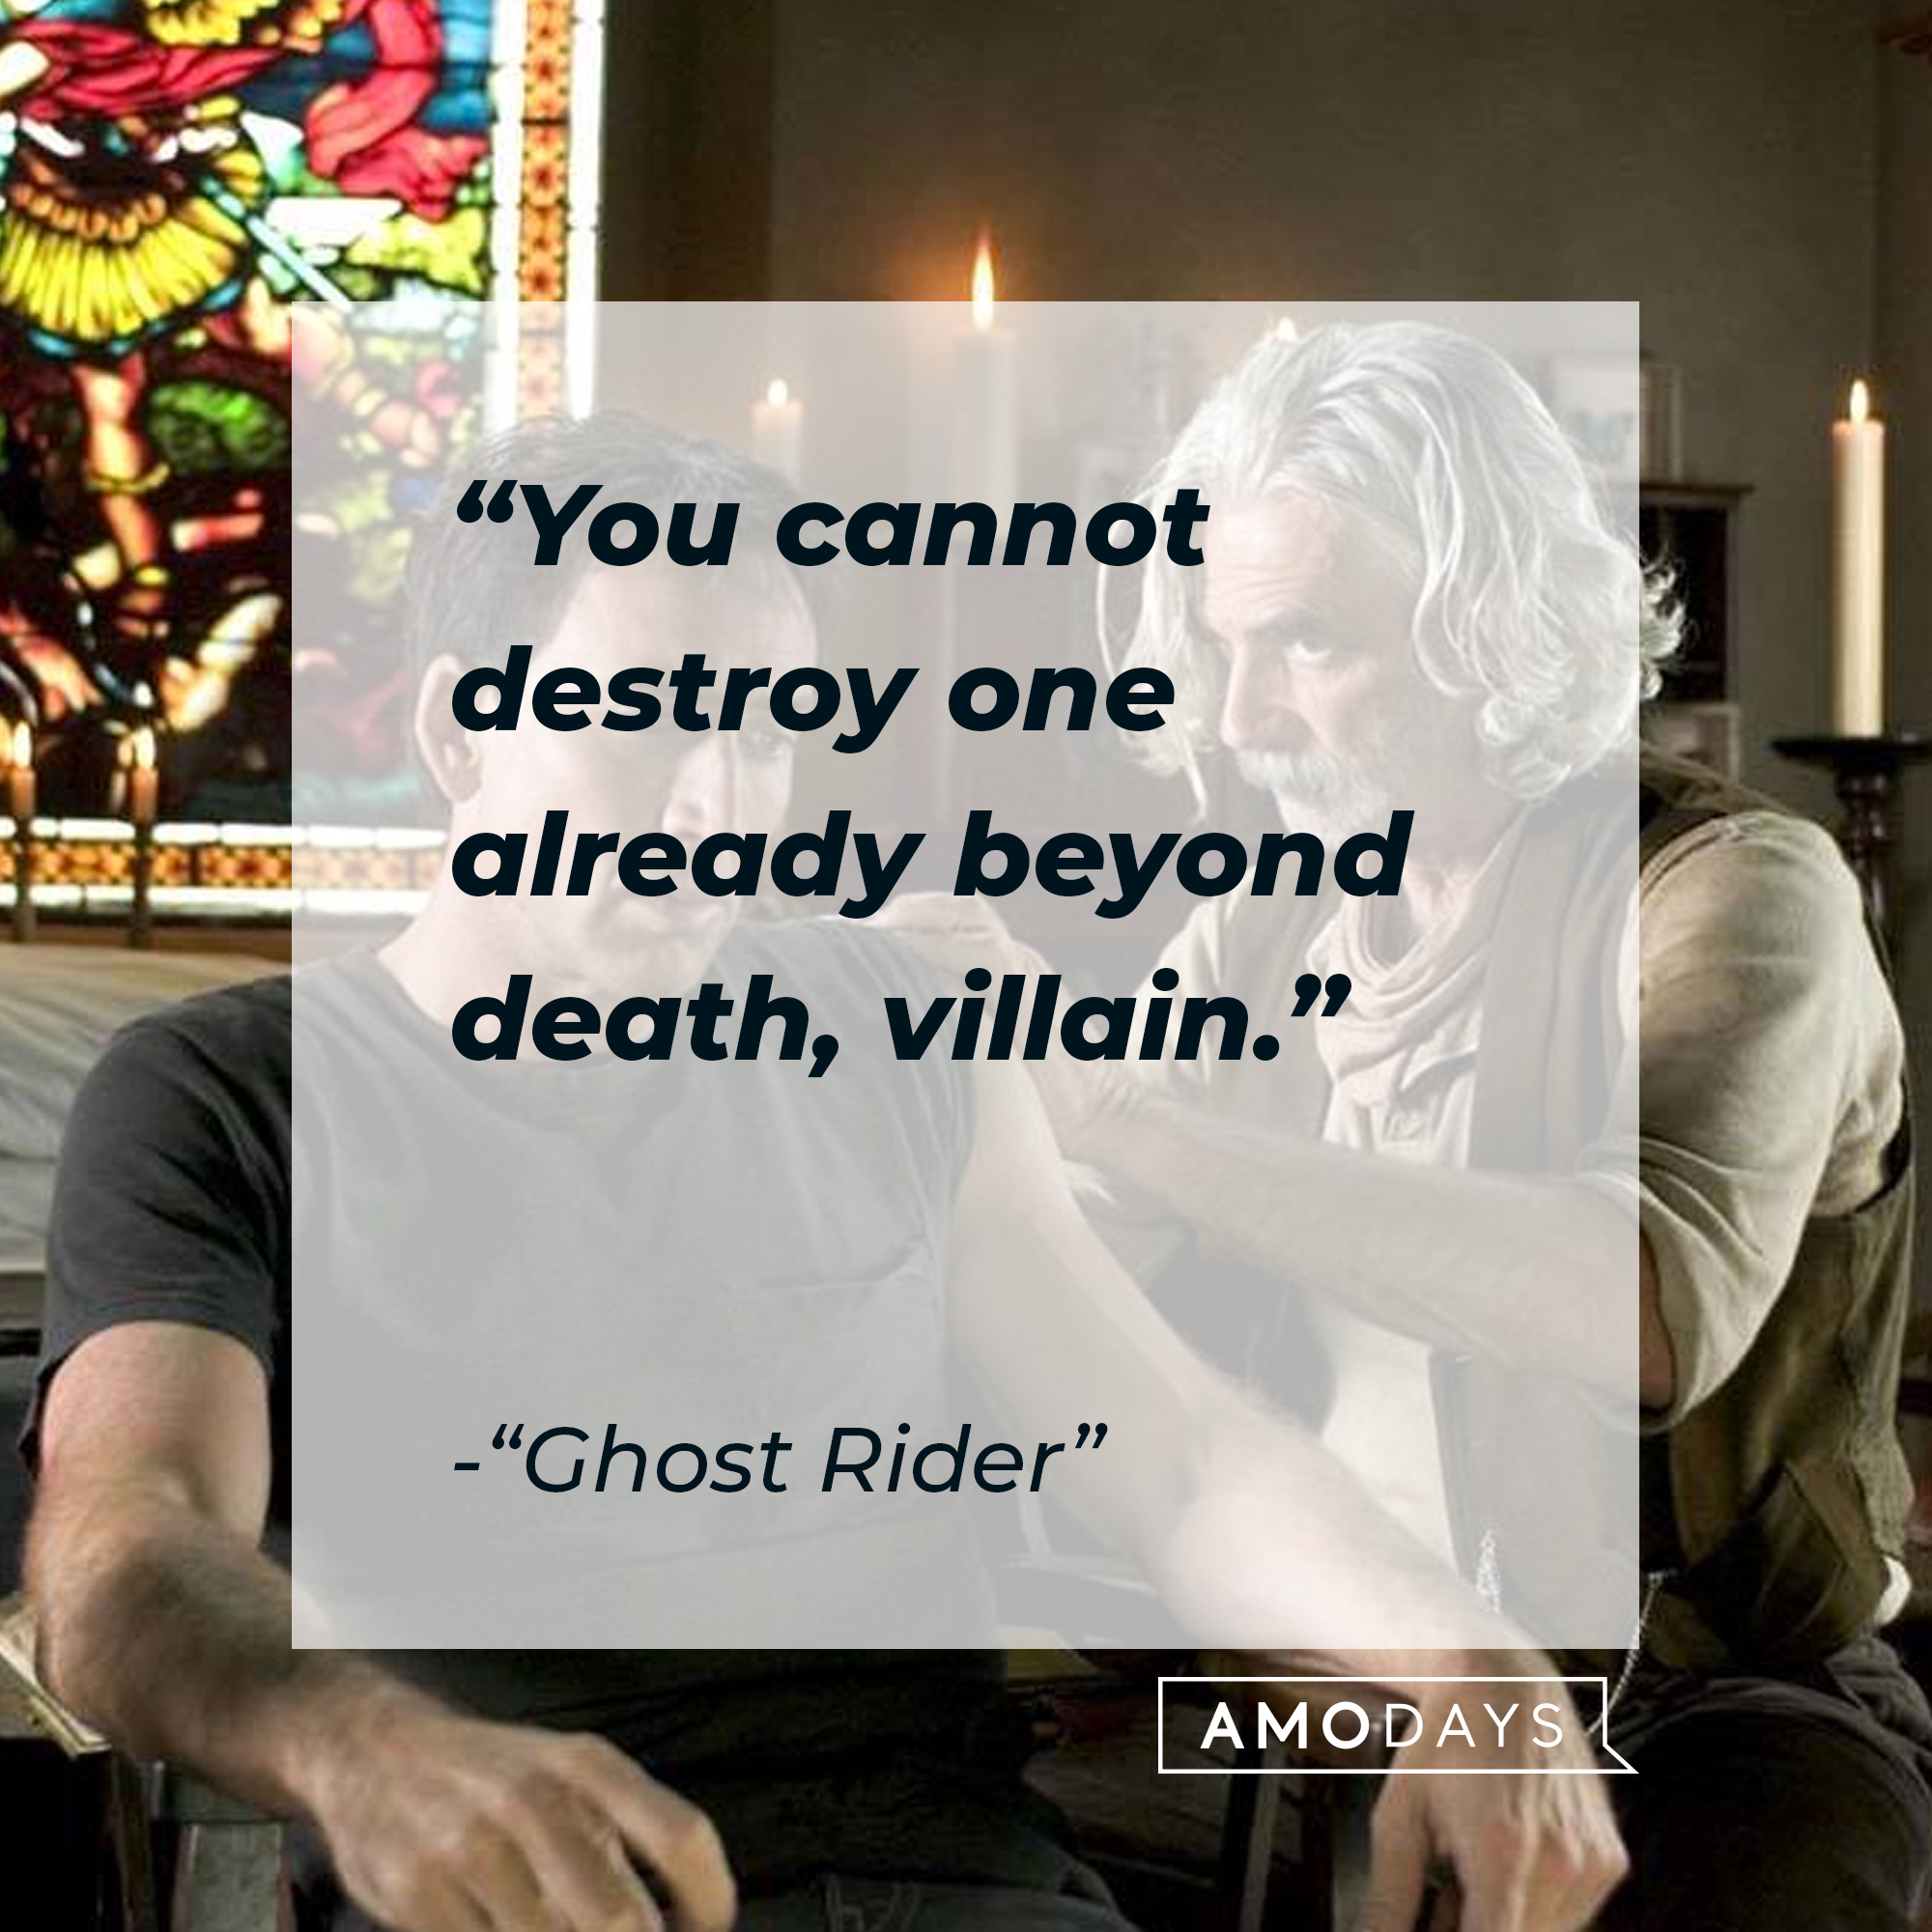 "Ghost Rider" quote: "You cannot destroy one already beyond death, villain." | Source: facebook.com/ghostridermovie